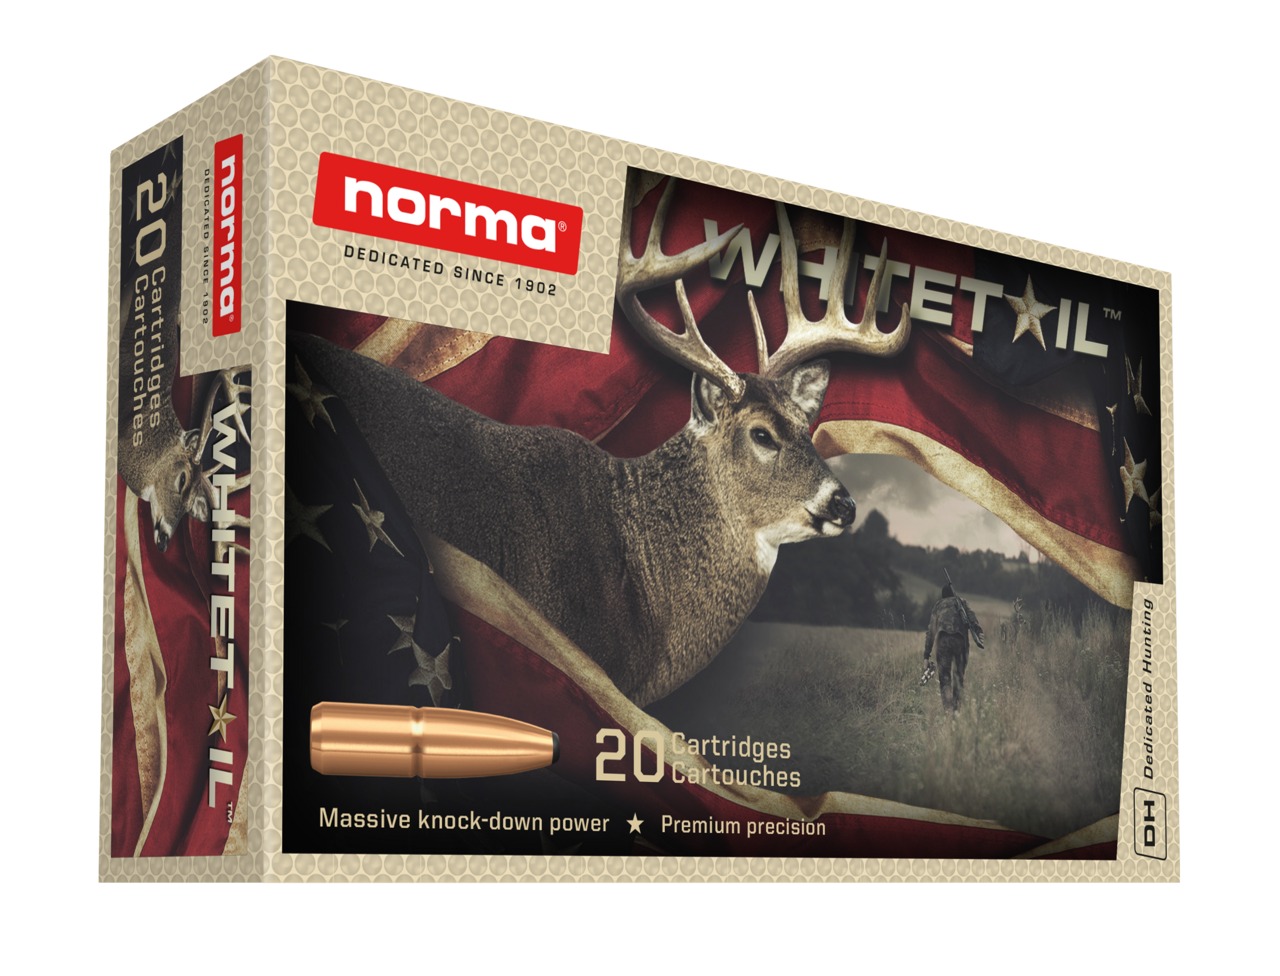 CART NORMA .308WIN 11.7G 180GR WHITETAIL BTE 20 ref 20177592 NORMA